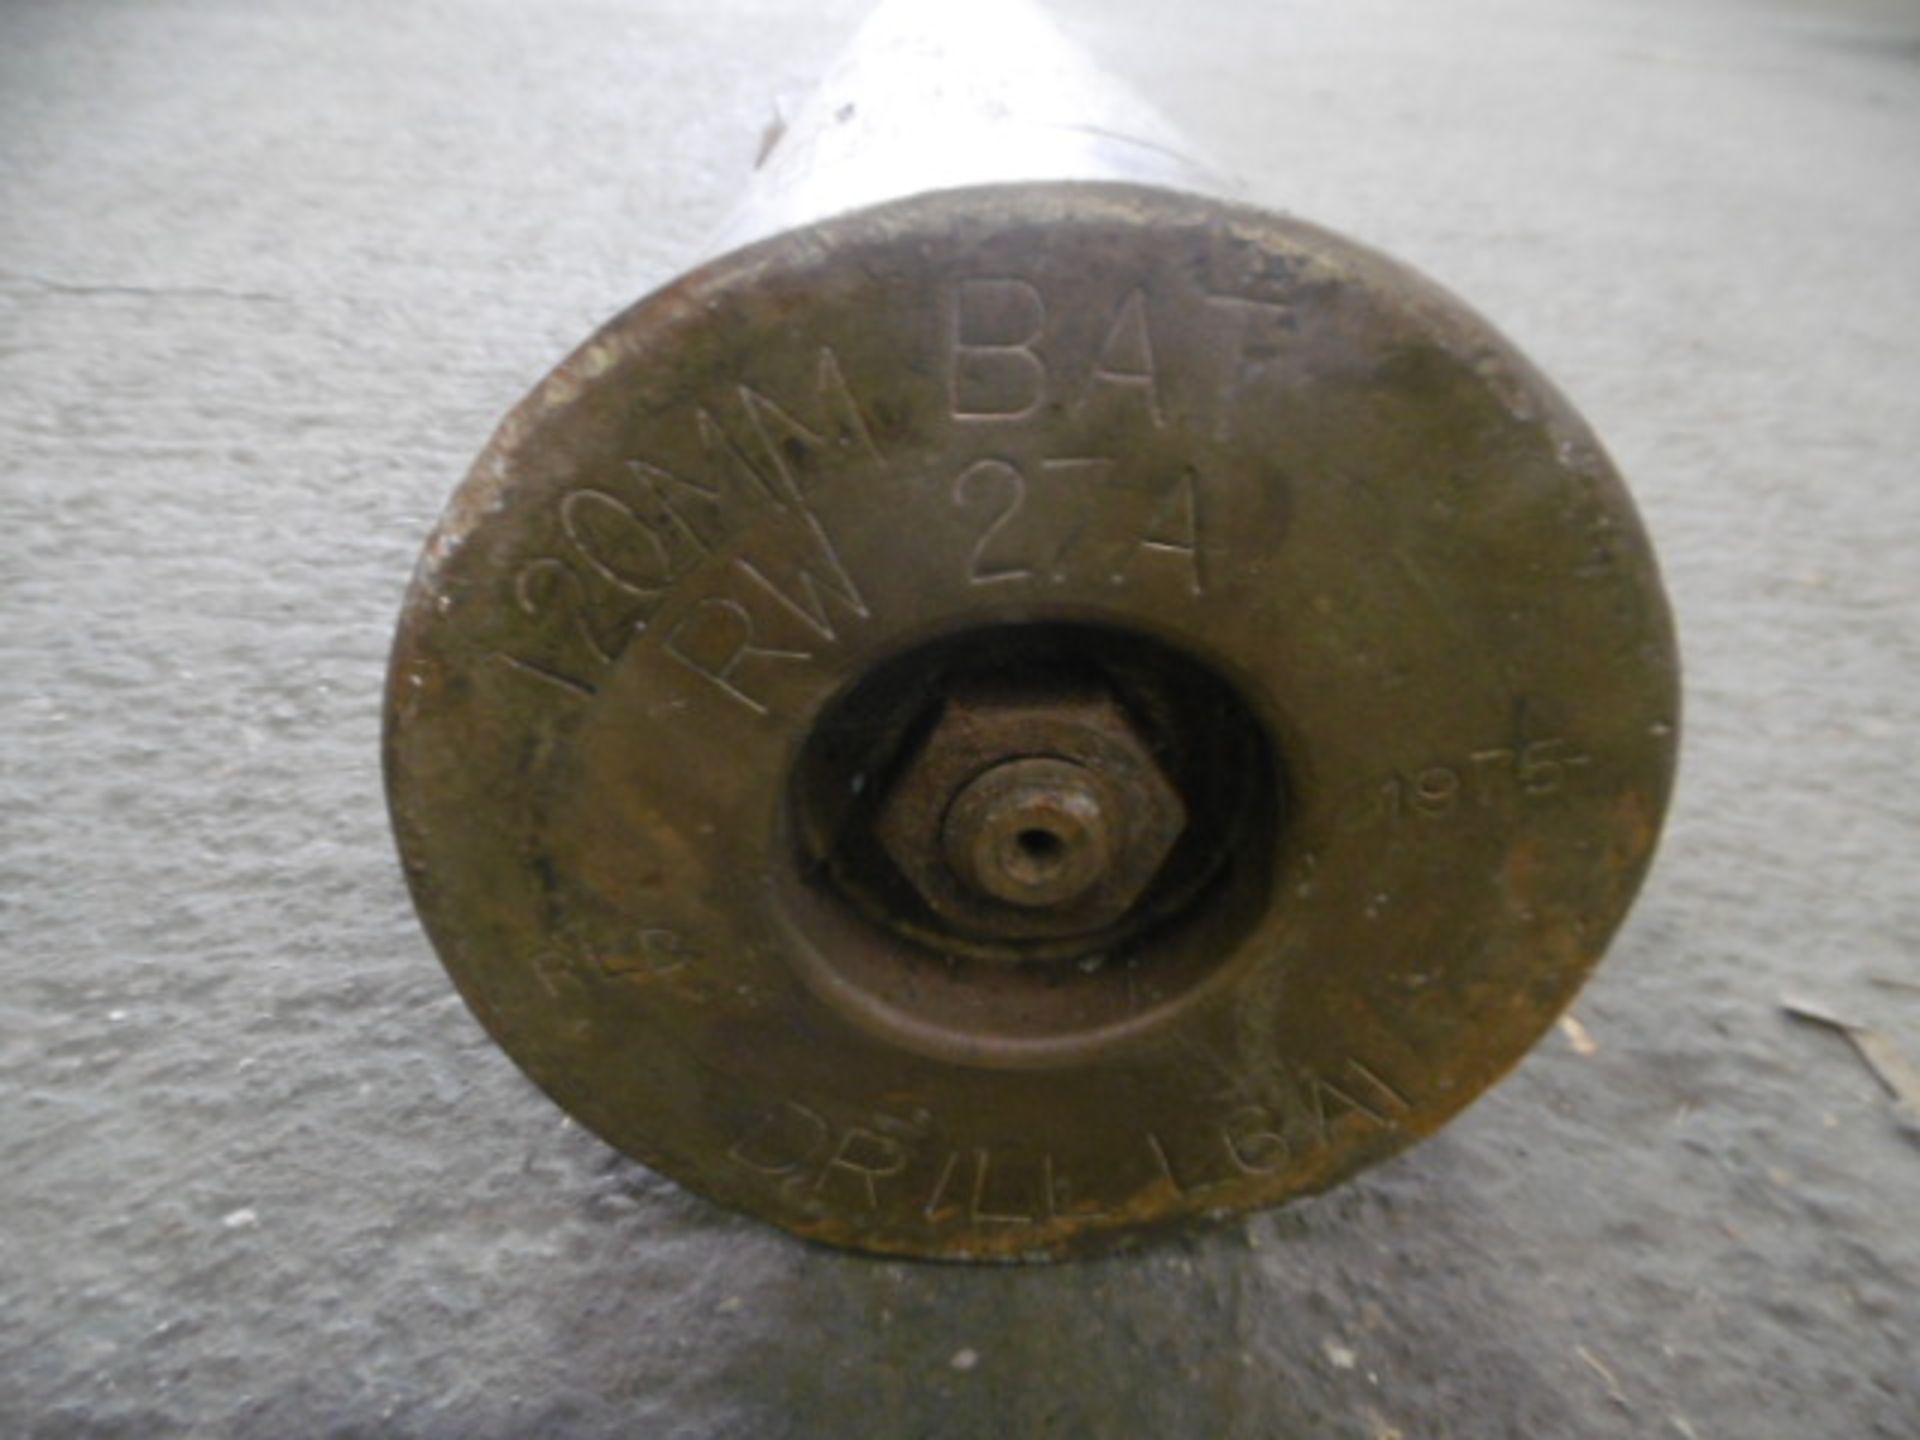 Wombat Anti-Tank Shell (Drill Round) Extremely Rare - Image 3 of 6